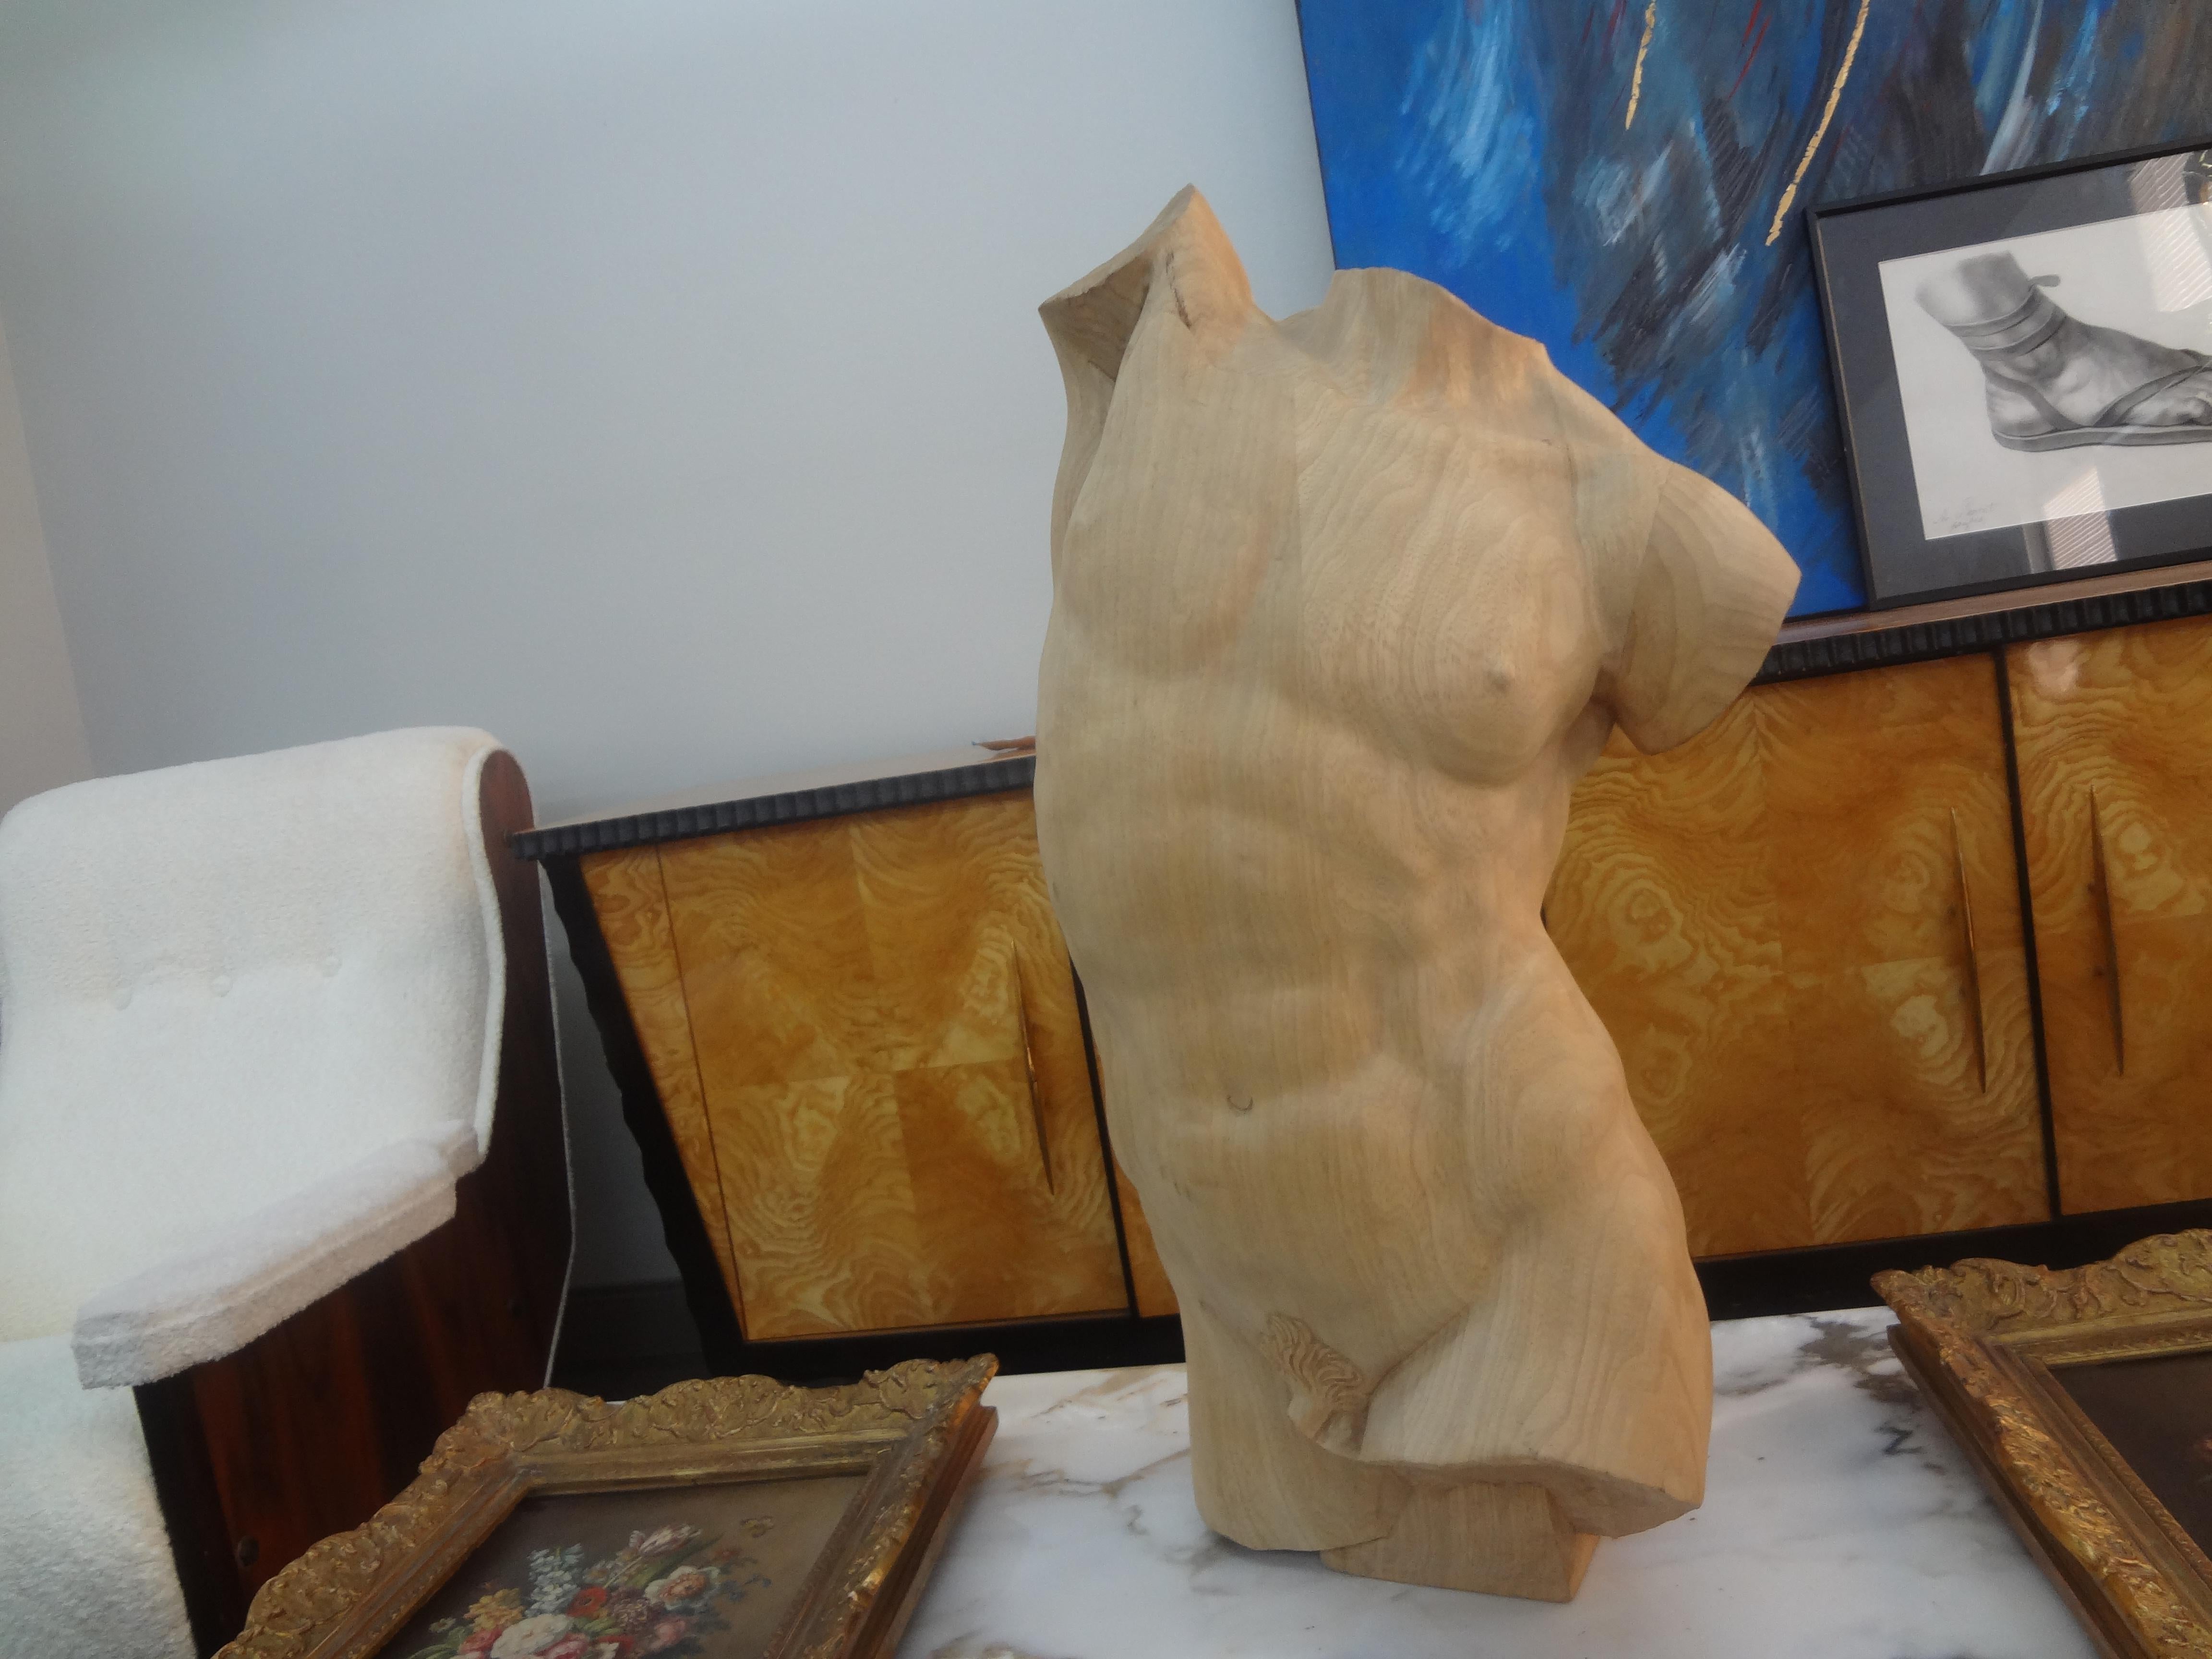 Italian Modern carved wood male torso.
This handsome large Italian male torso sculpture is expertly hand carved in fruitwood and would look great on a pedestal or on a console table or centre table.